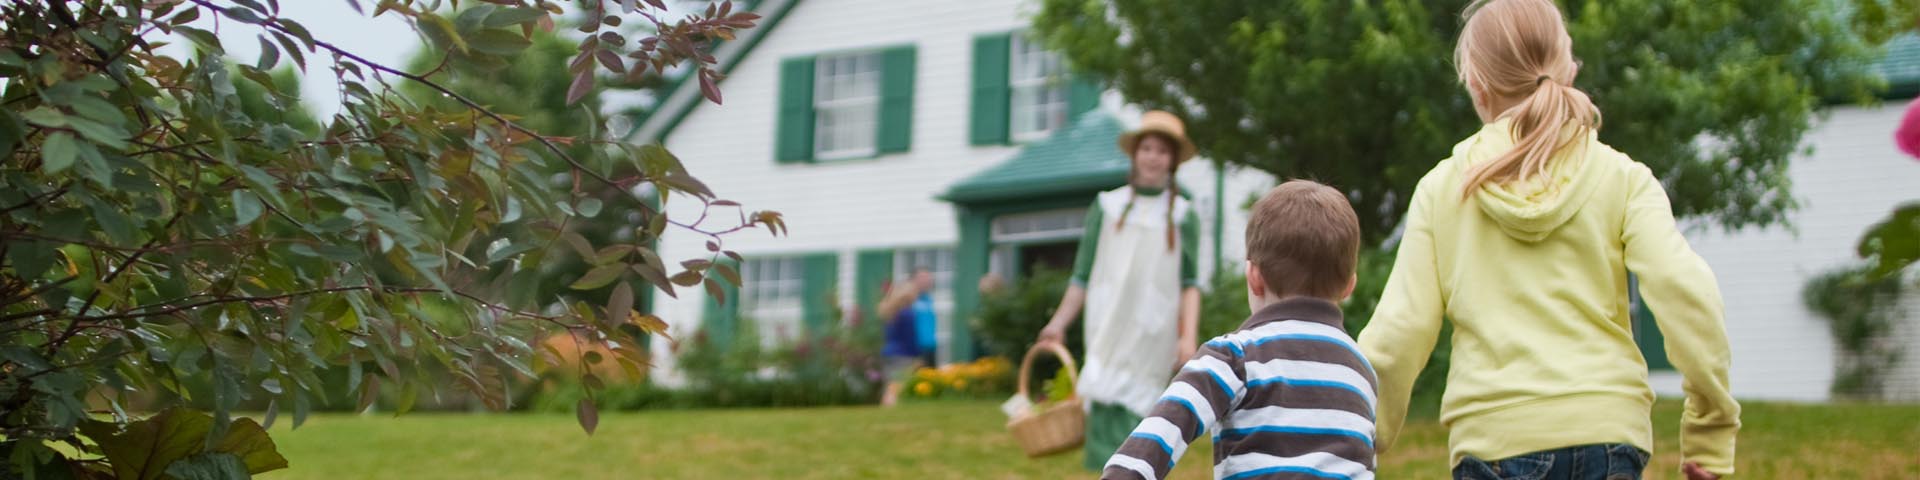 A guide in an Anne Shirley costume with a young girl walk past a historic house. 